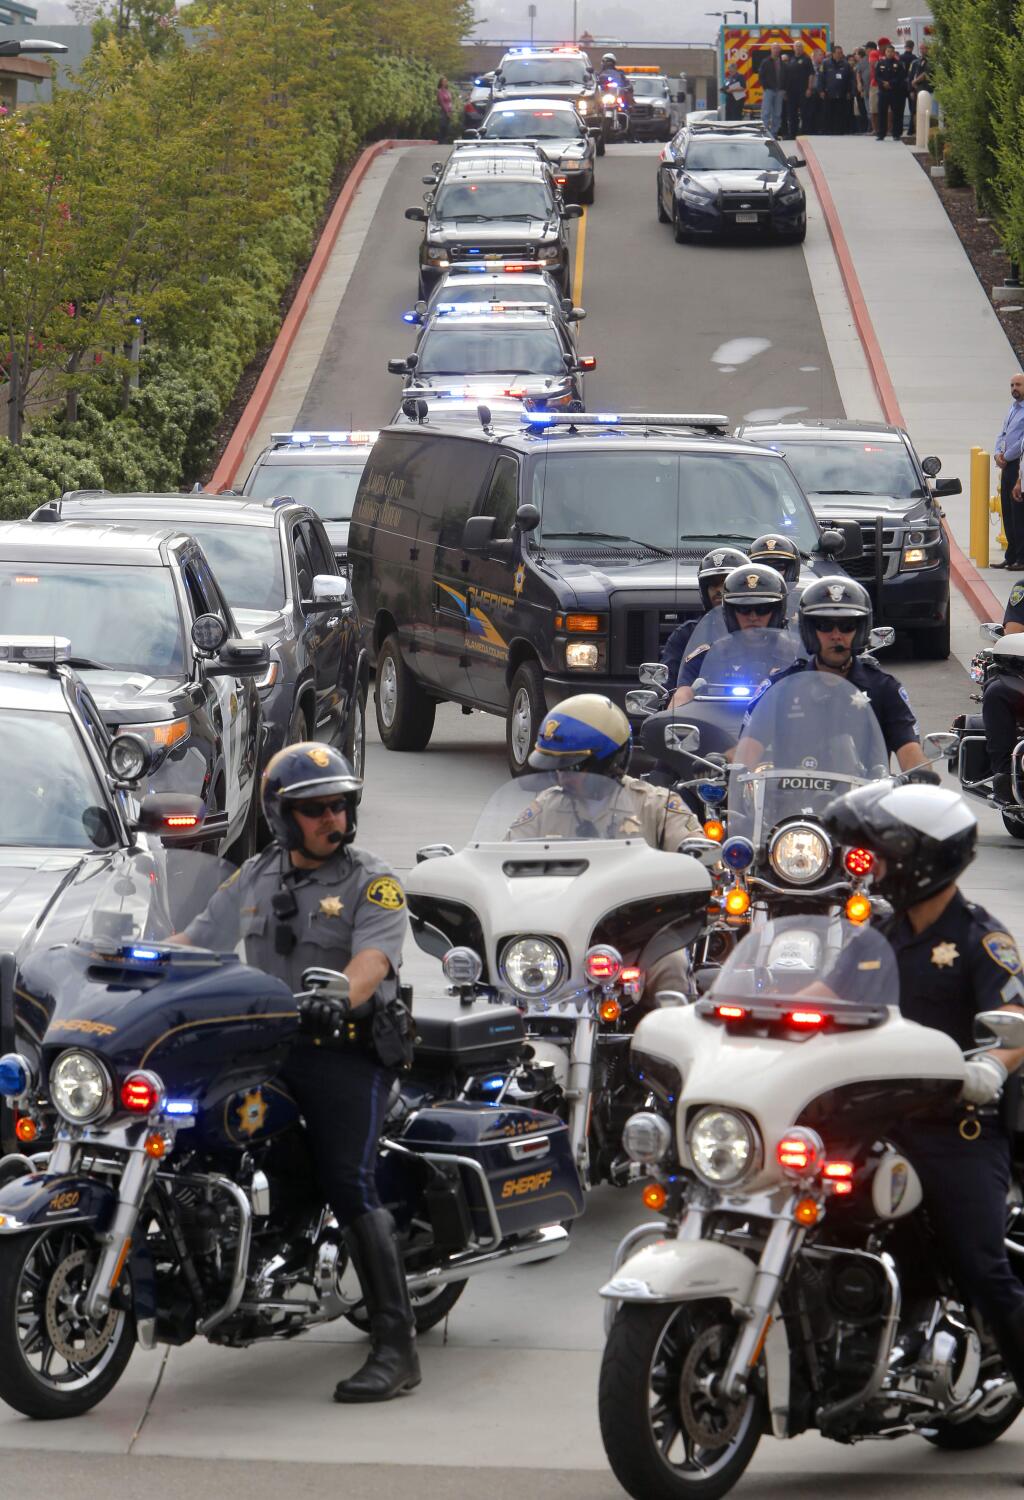 Police officers escort the Alameda County Coroner's van from the Eden Medical center after a Hayward police officer was shot and killed during a traffic stop in Hayward, Calif., on Wednesday, July 22, 2015. Sgt. Scott Lunger, 48, was shot in the early morning after he stopped a white Chevrolet pickup that was swerving on the road and driving erratically. (Michael Macor/San Francisco Chronicle via AP)